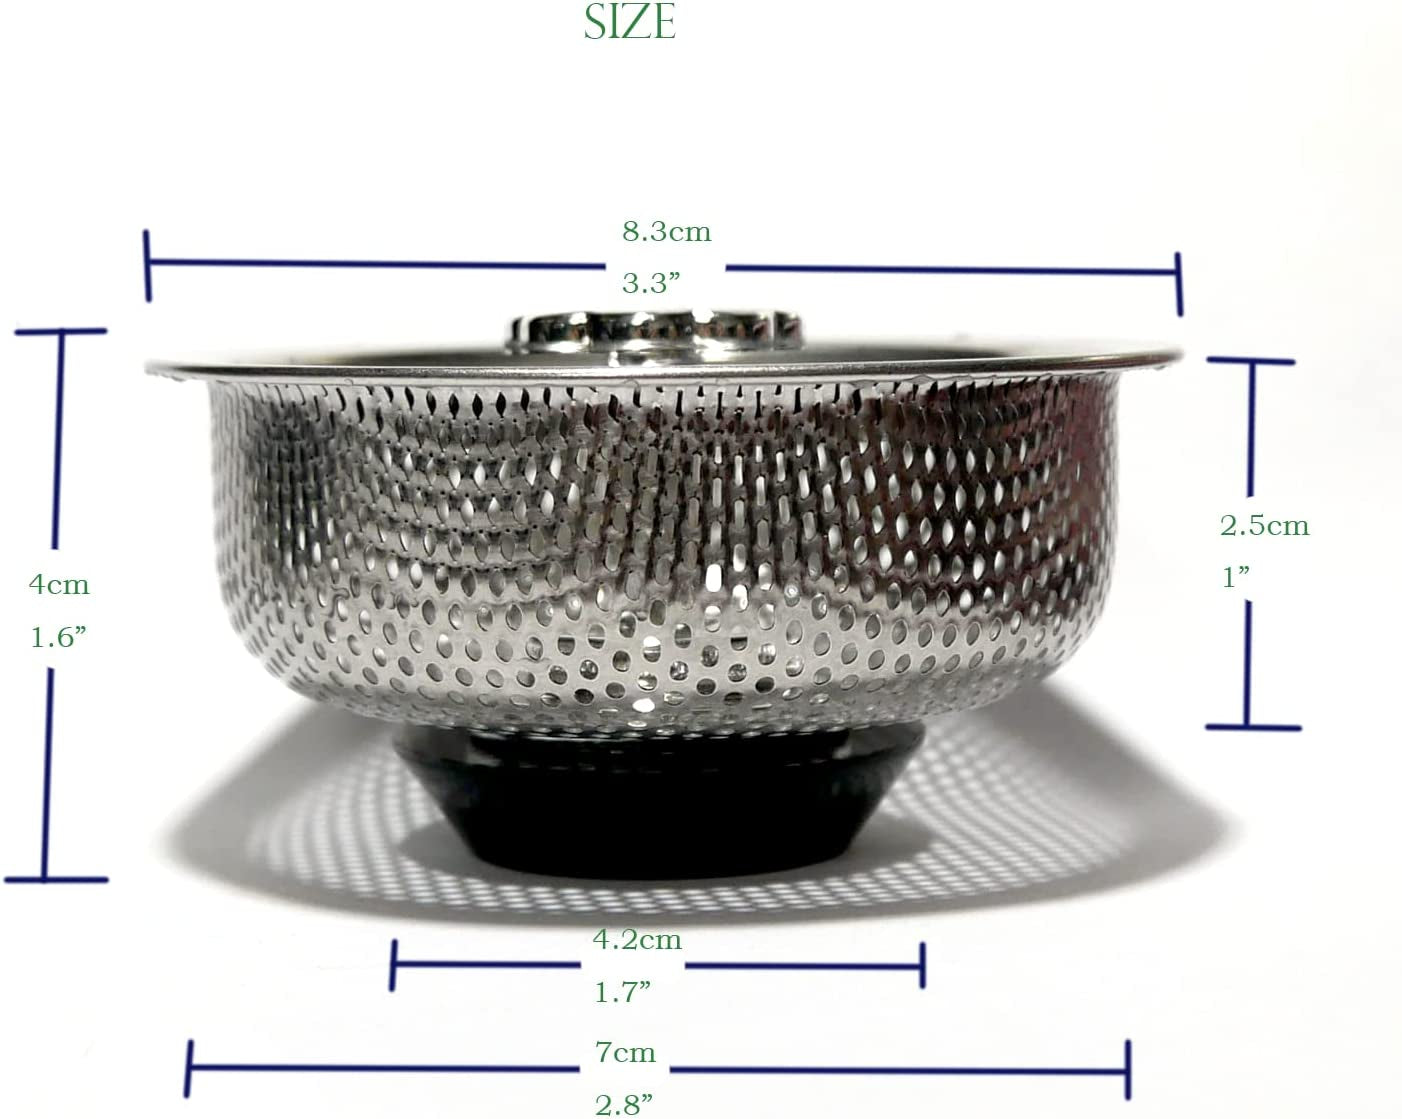 SYEAPONE, Kitchen Sink Strainer Made of Strong Stainless Steel Anti-Blocking Drain and Filter Debris and Preventing Clogged by Kitchen Waste with Rubber Stopper (2 Pack)